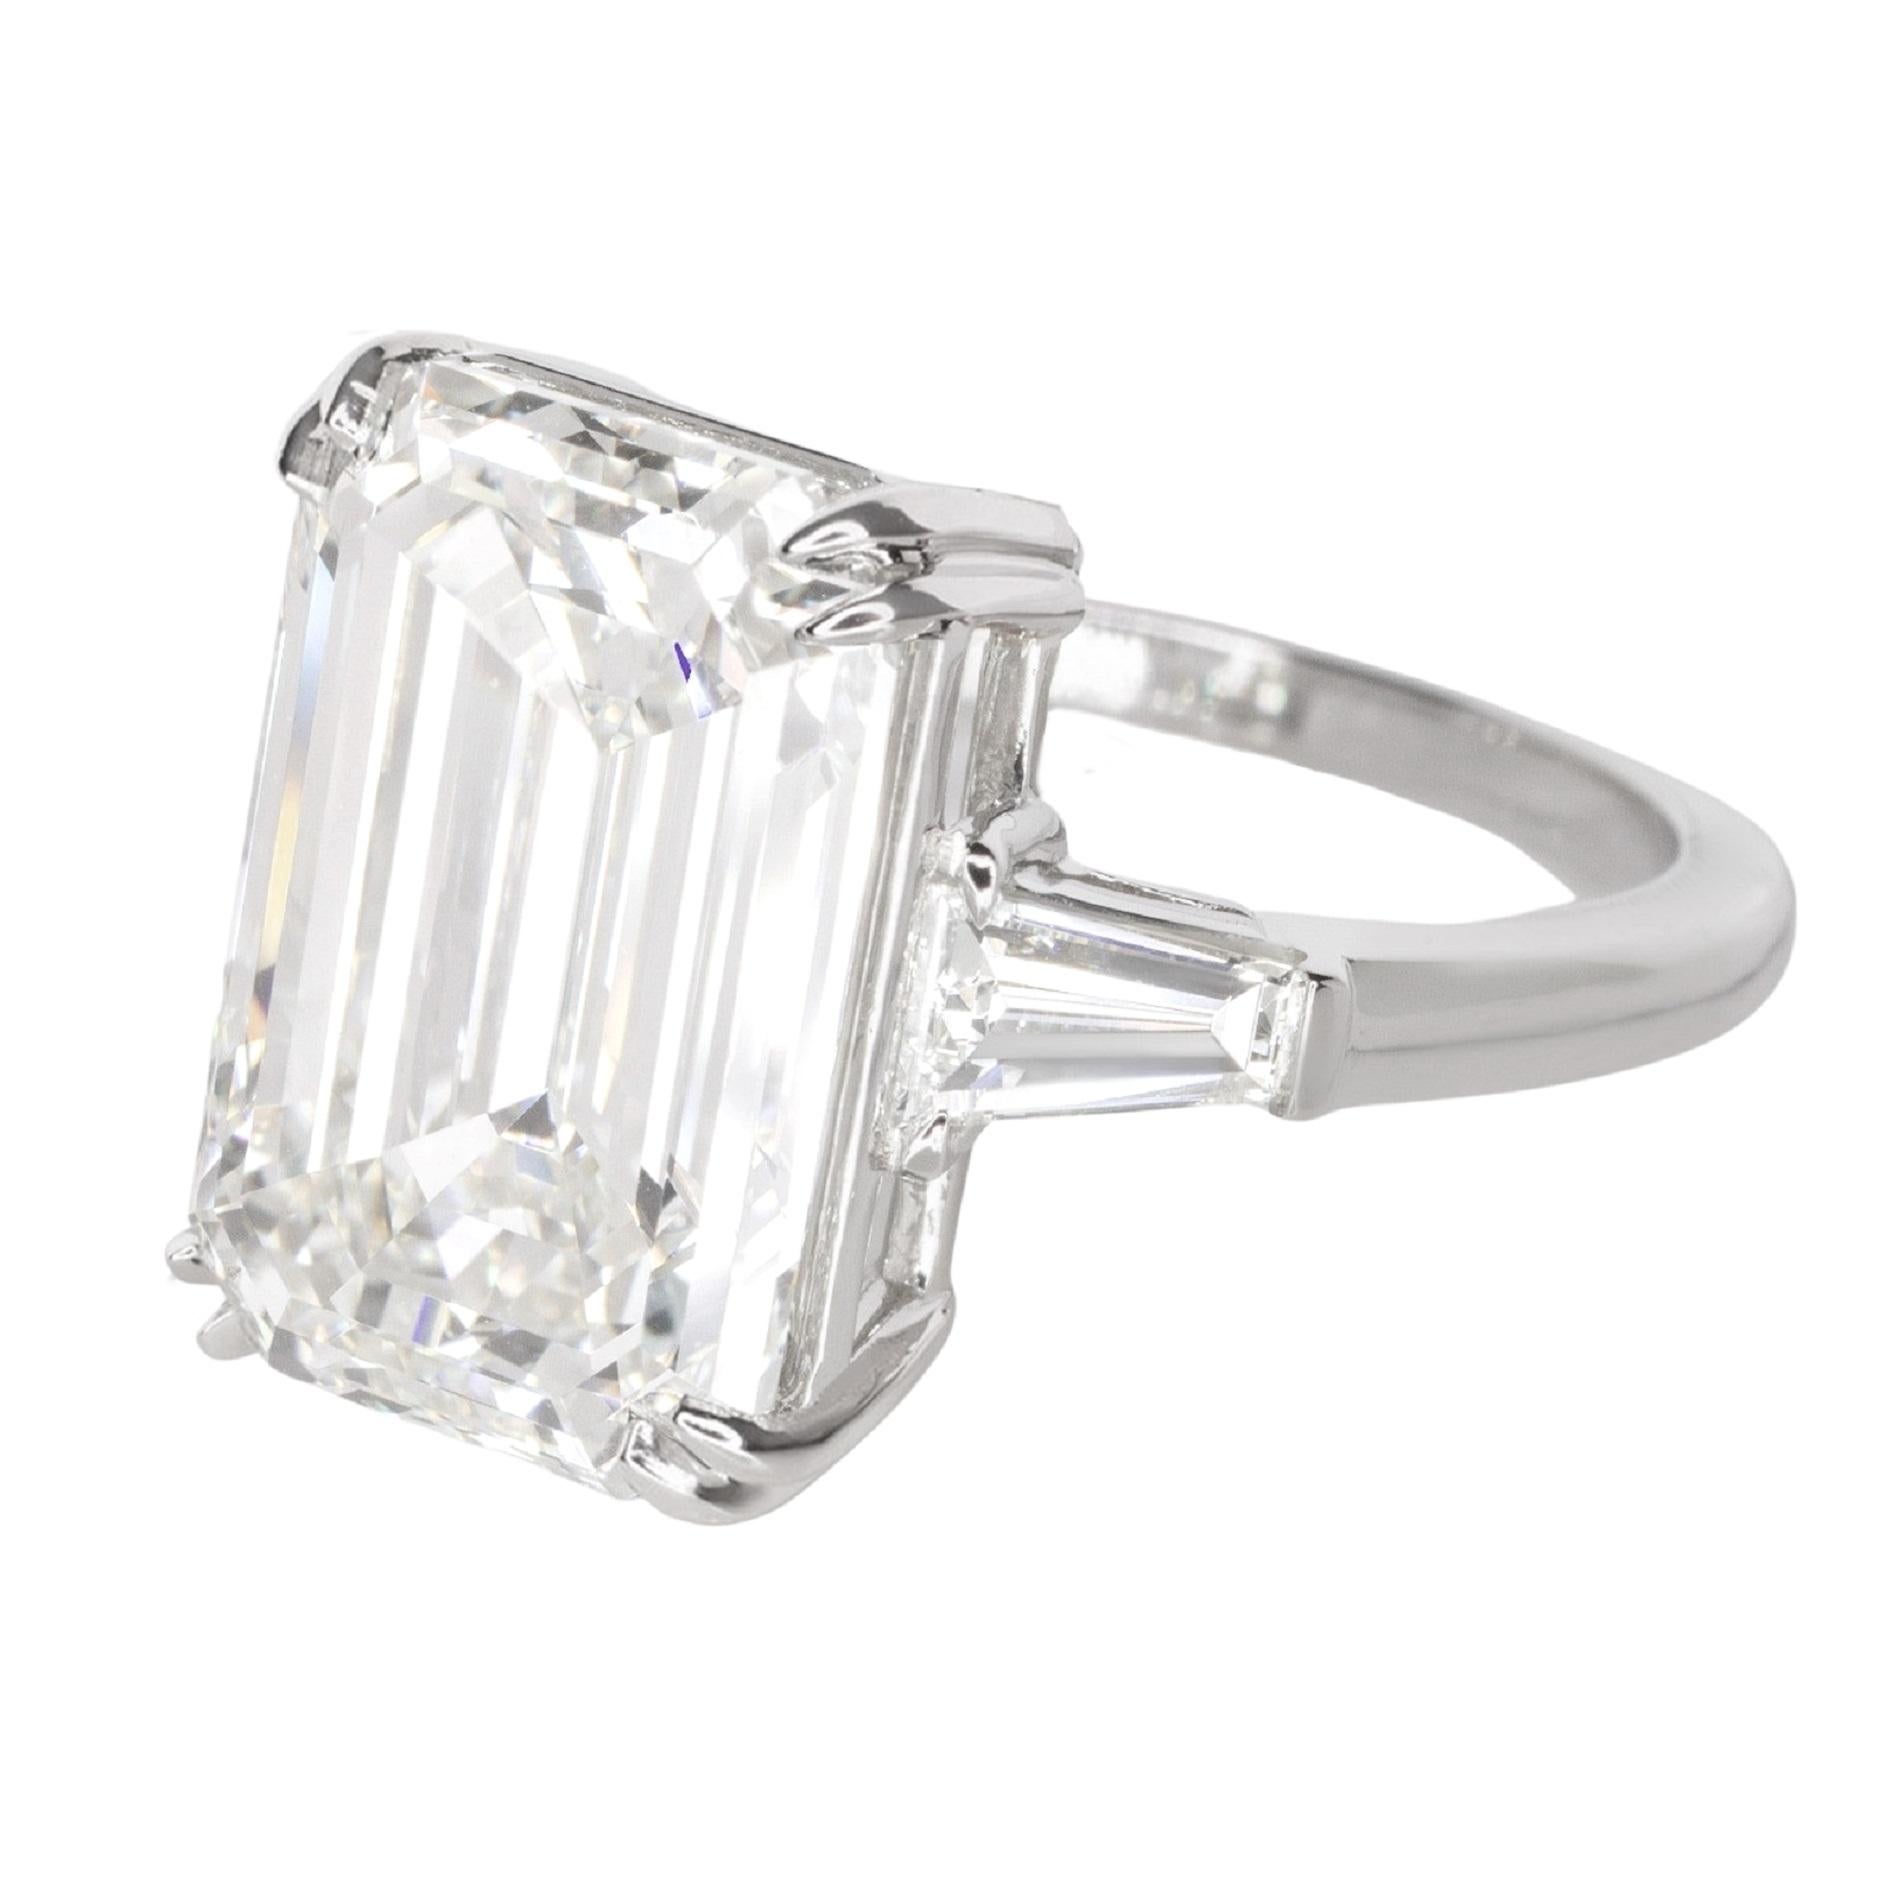 Gorgeous and utterly classic vintage engagement ring combines eye catching impressive sparkle with an eternally stylish design. The 3 carat emerald cut center diamond is bright white, completely loop clean, and sparkles with gorgeous brilliance!